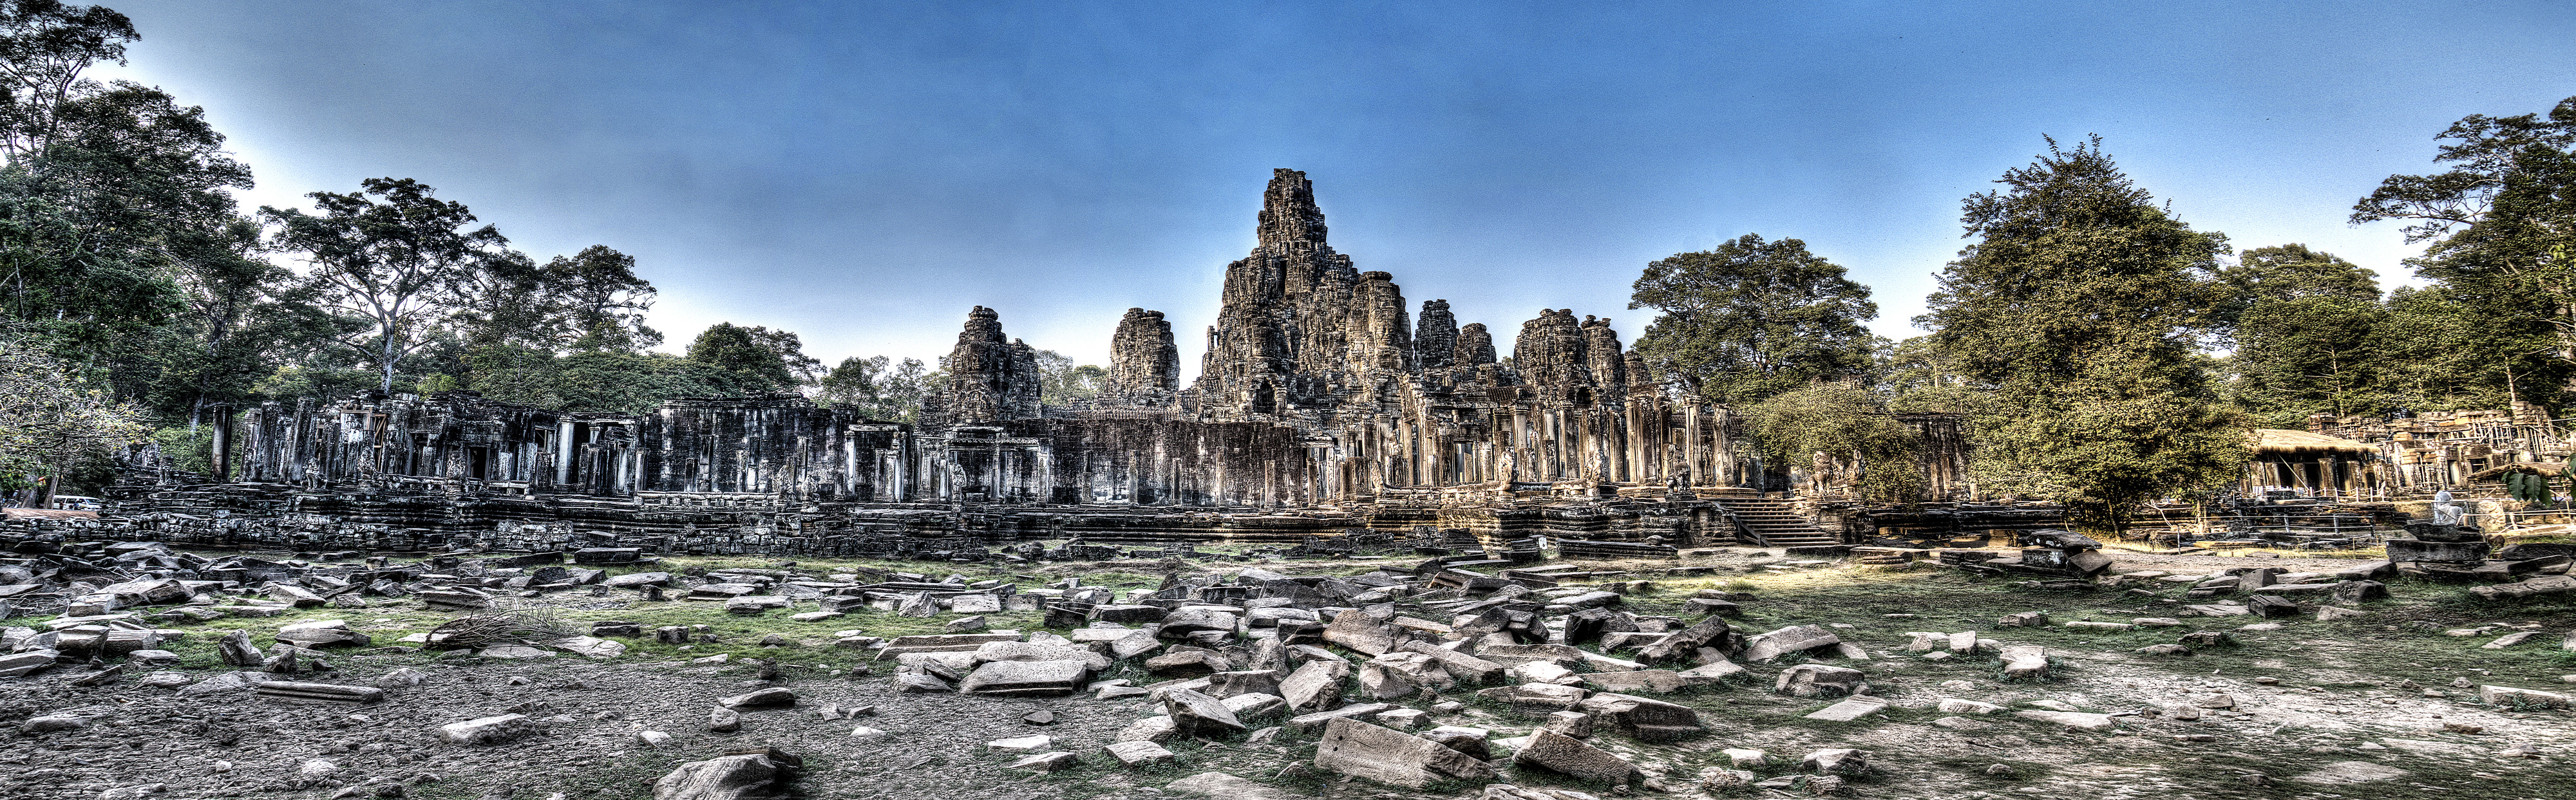 The Khmer Angorian tempel of Bayon; known as the Mona Lisa of South East Asia.